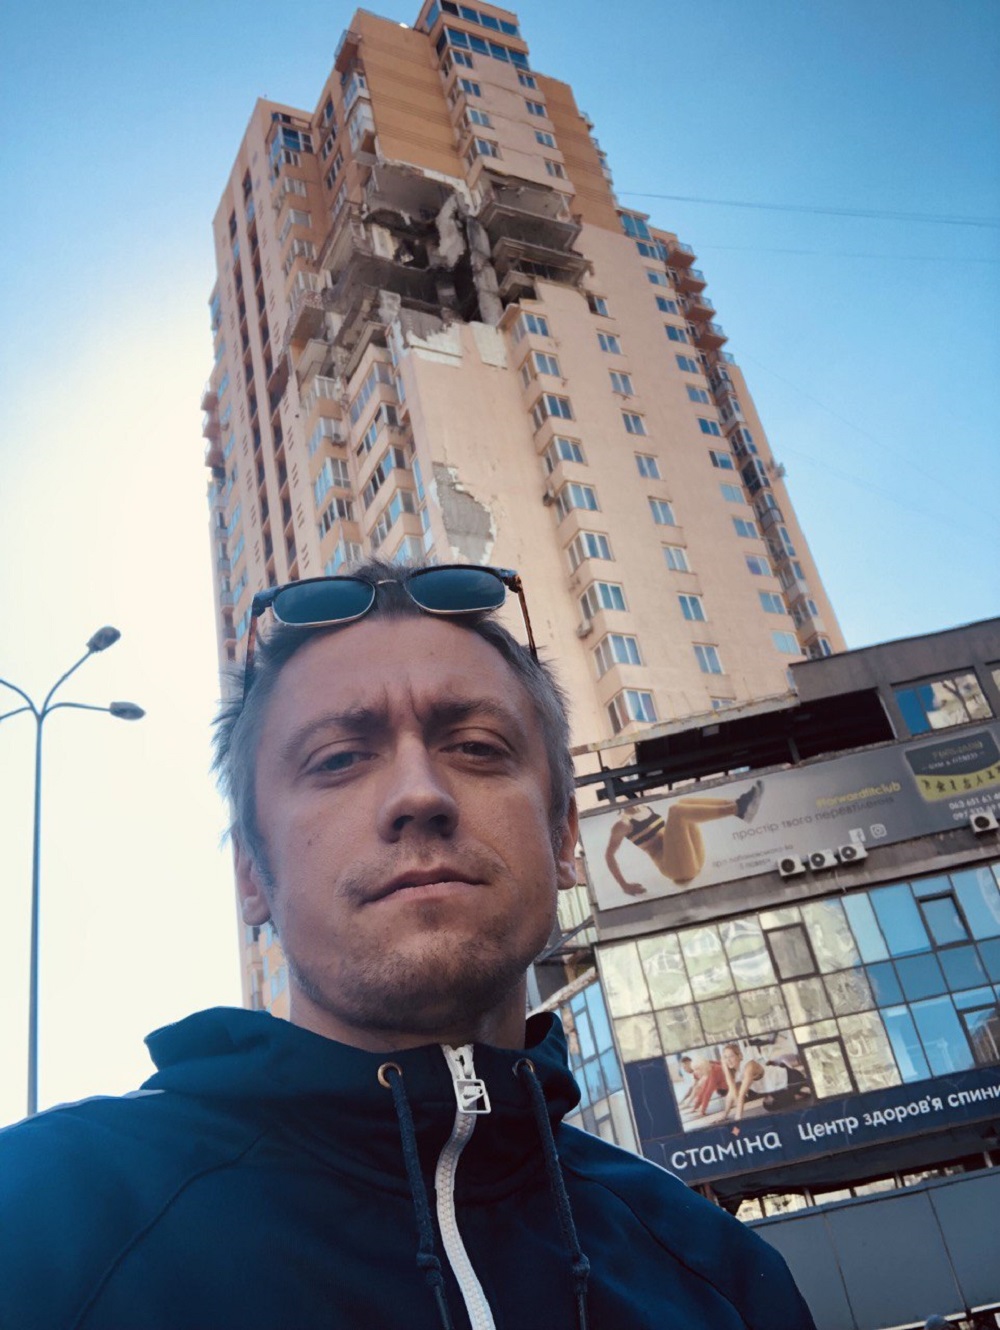 Man looking at the camera and standing in front of a building 